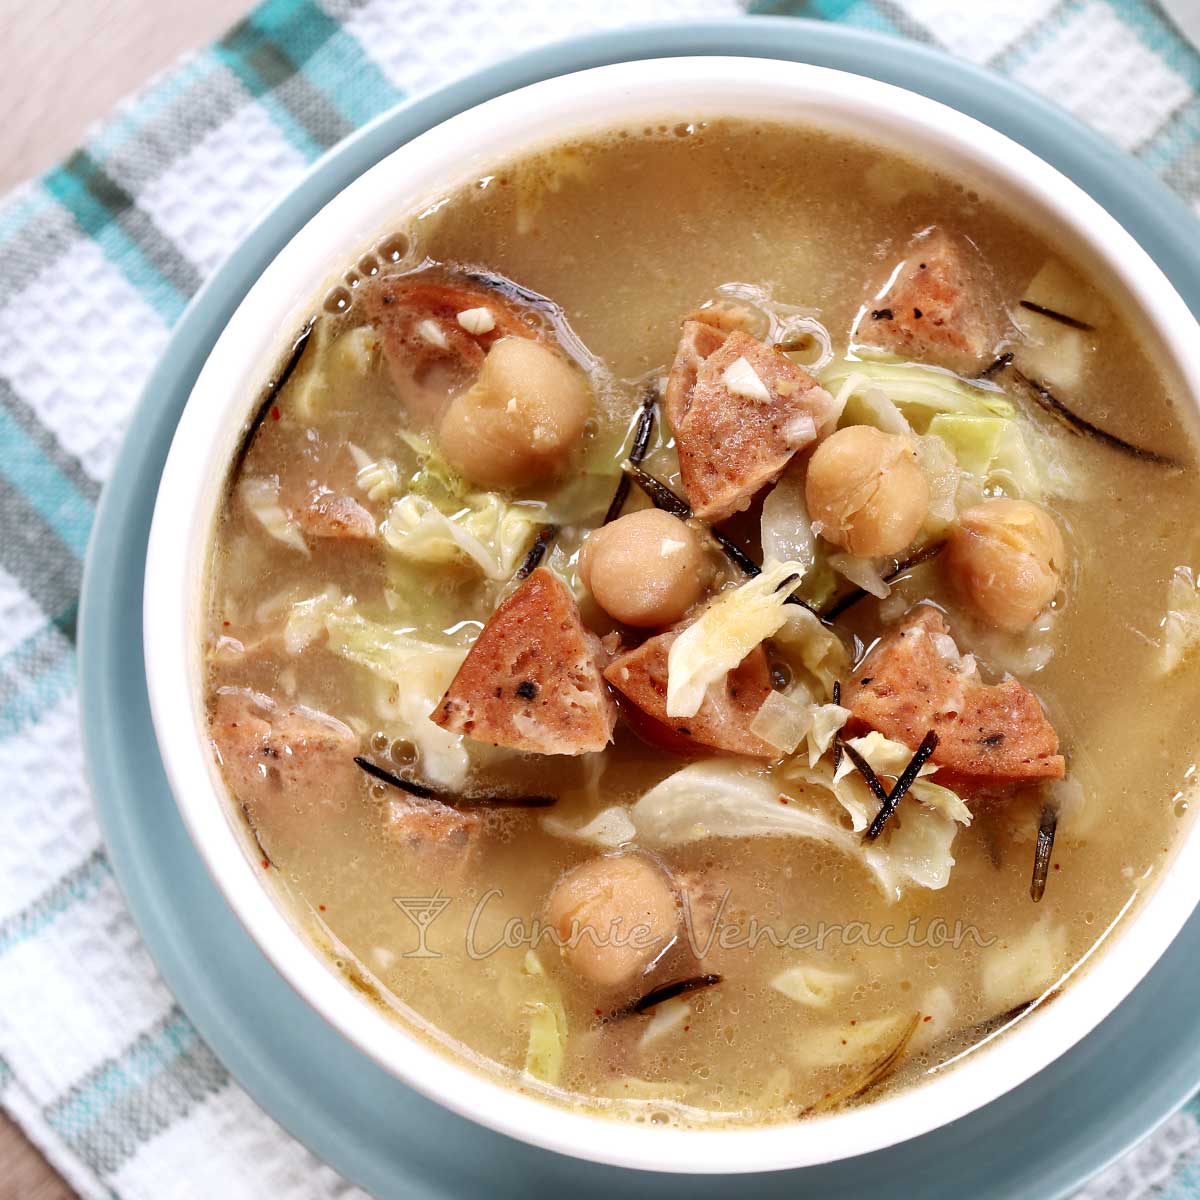 Sausage, chickpeas and cabbage soup